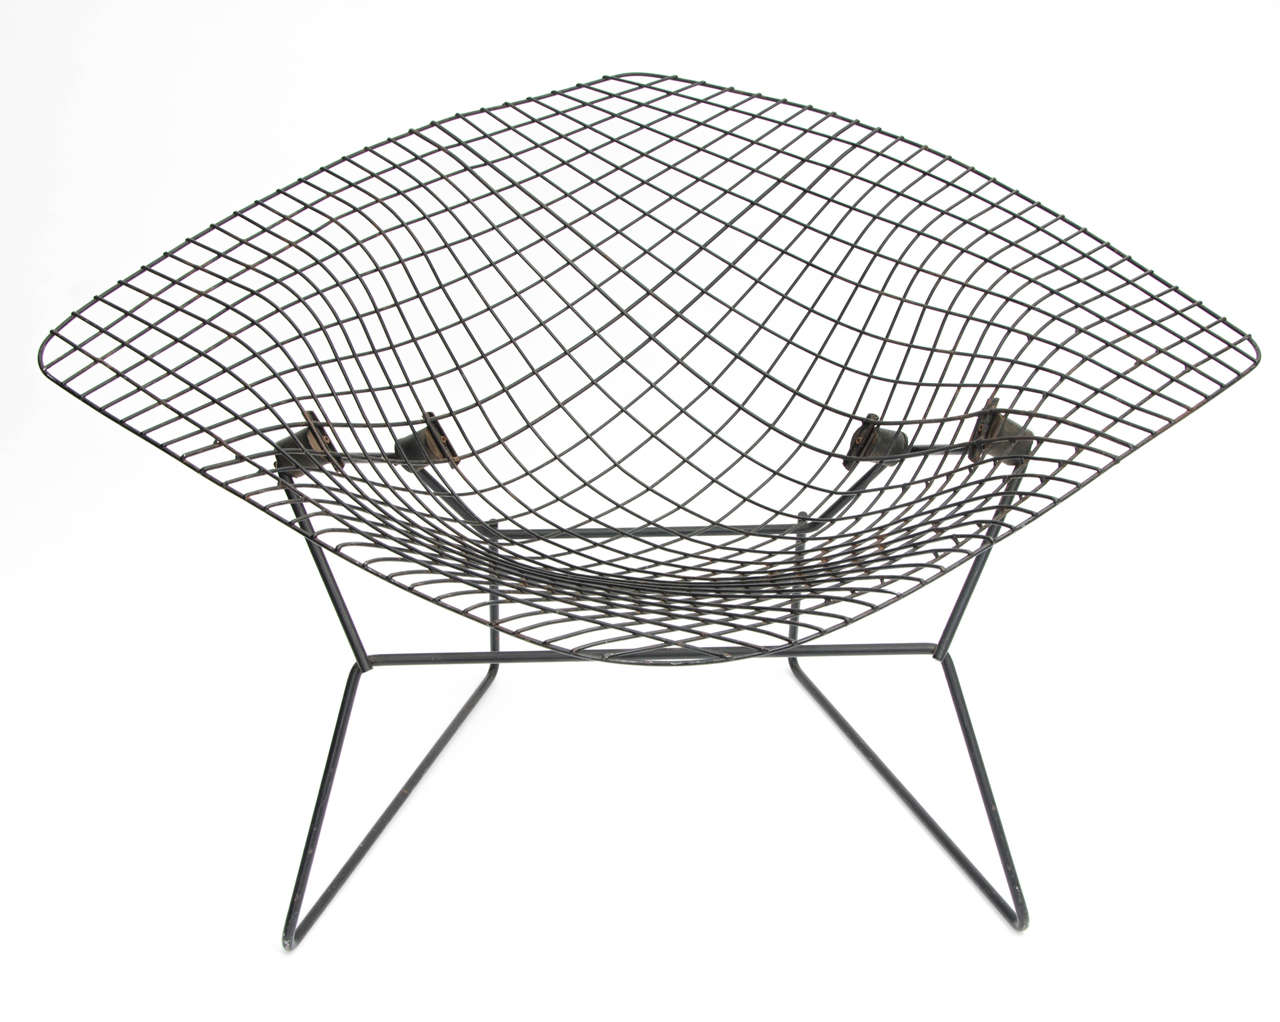 An early model of Bertoia's iconic wide diamond chair, designed in 1952 for Knoll.

This piece has been in the same home since acquisition in London in the 1950s and has seen only occasional use. Made of fine bent and welded steel wire, finished